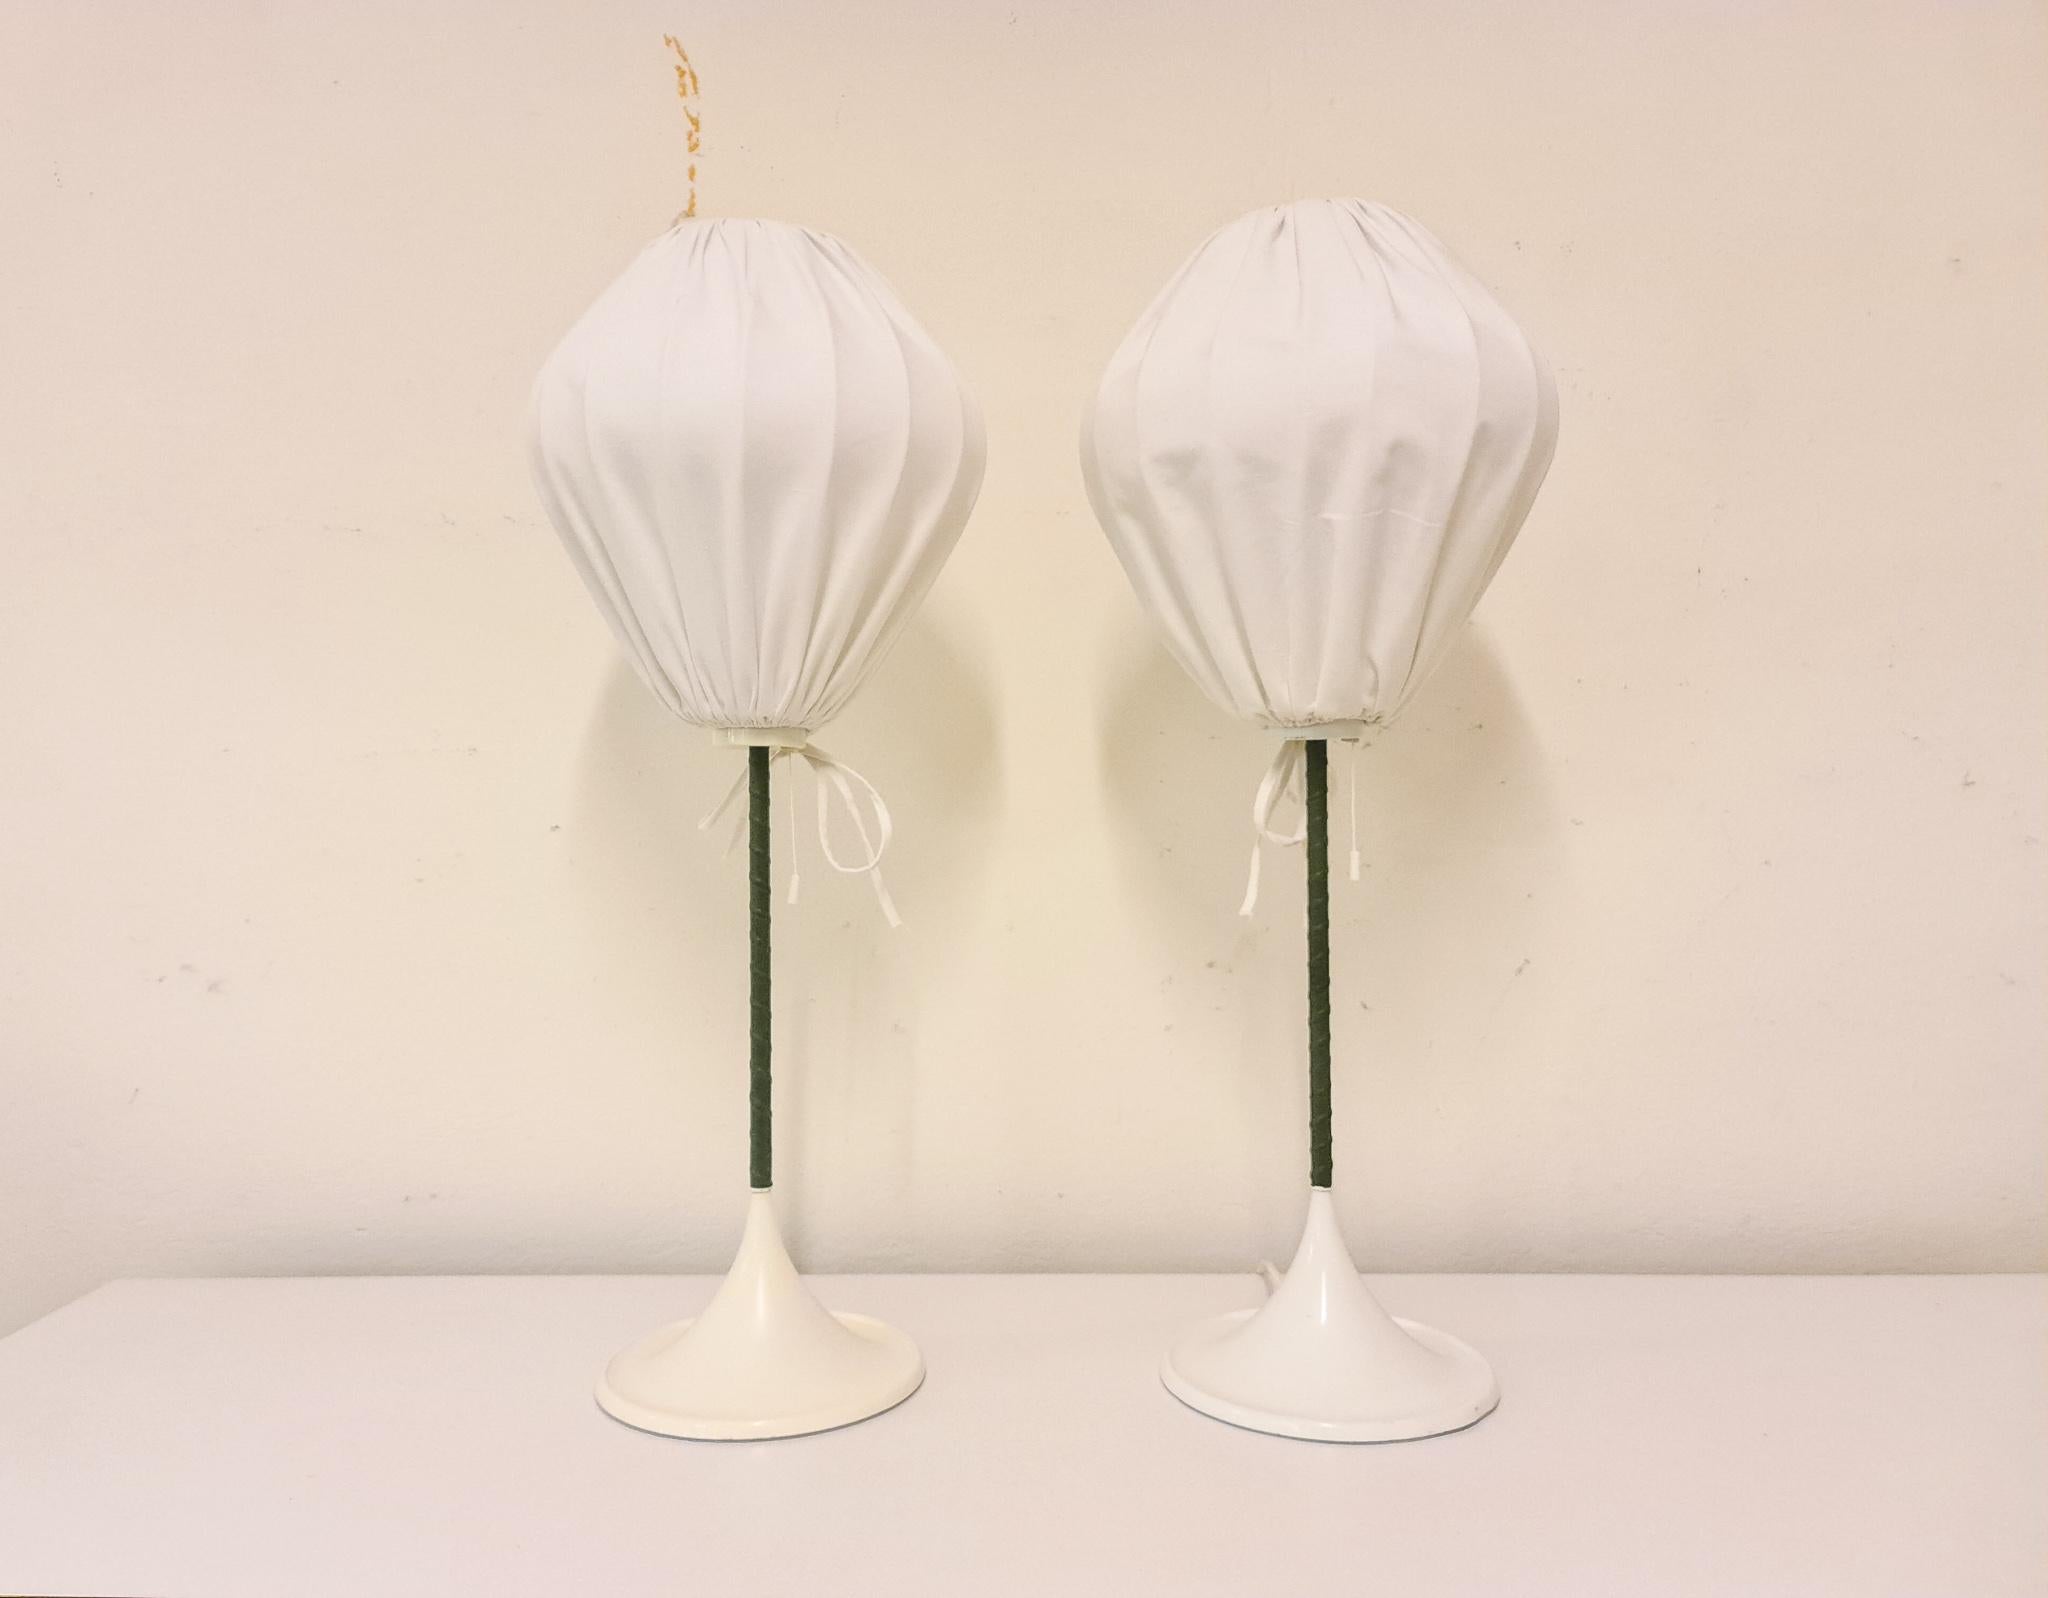 The table version of the iconic Bergboms design. Cast iron base finished with white lacquer. This pair of table lamps will give that great look to a vintage home or a twist to the modern home. The shade has a new fabric and its rod is in dark green